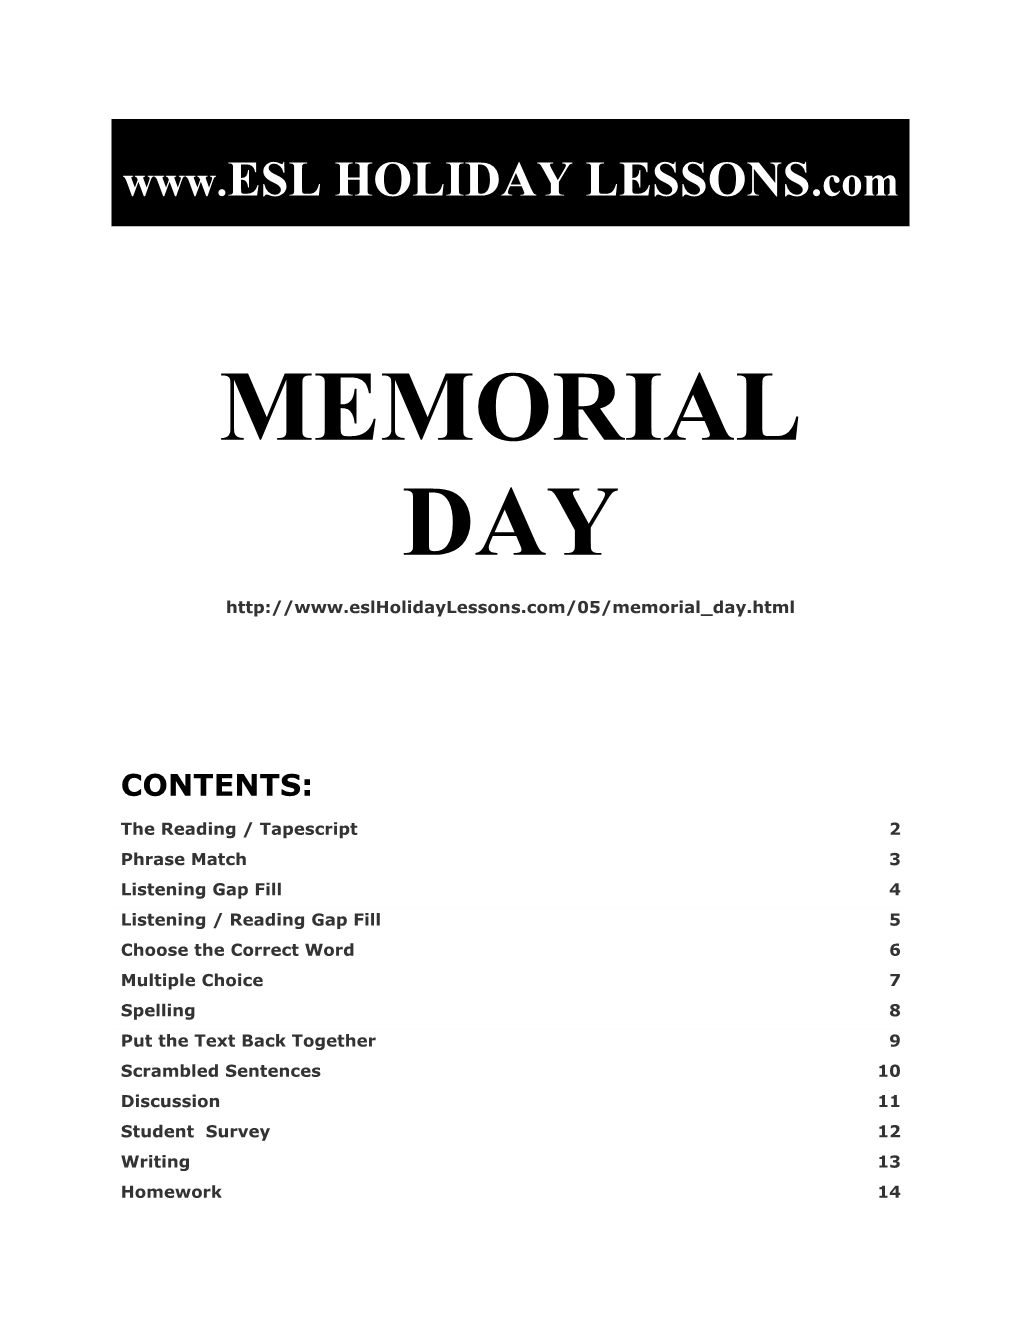 Holiday Lessons - Memorial Day